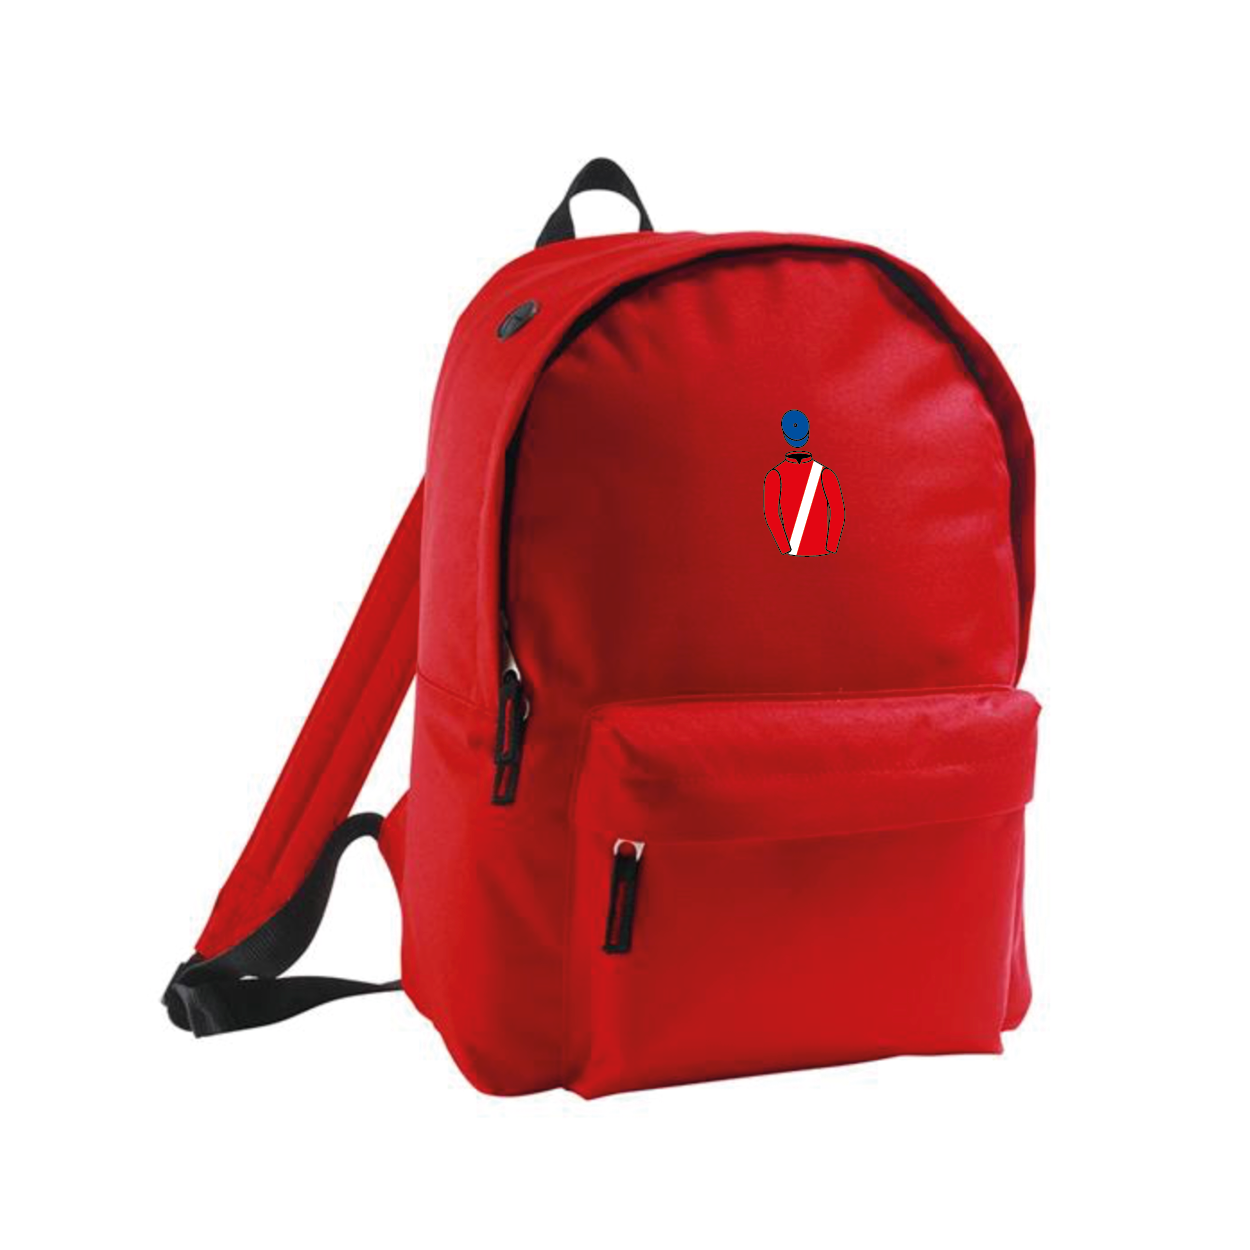 Cheveley Park Backpack - Hacked Up